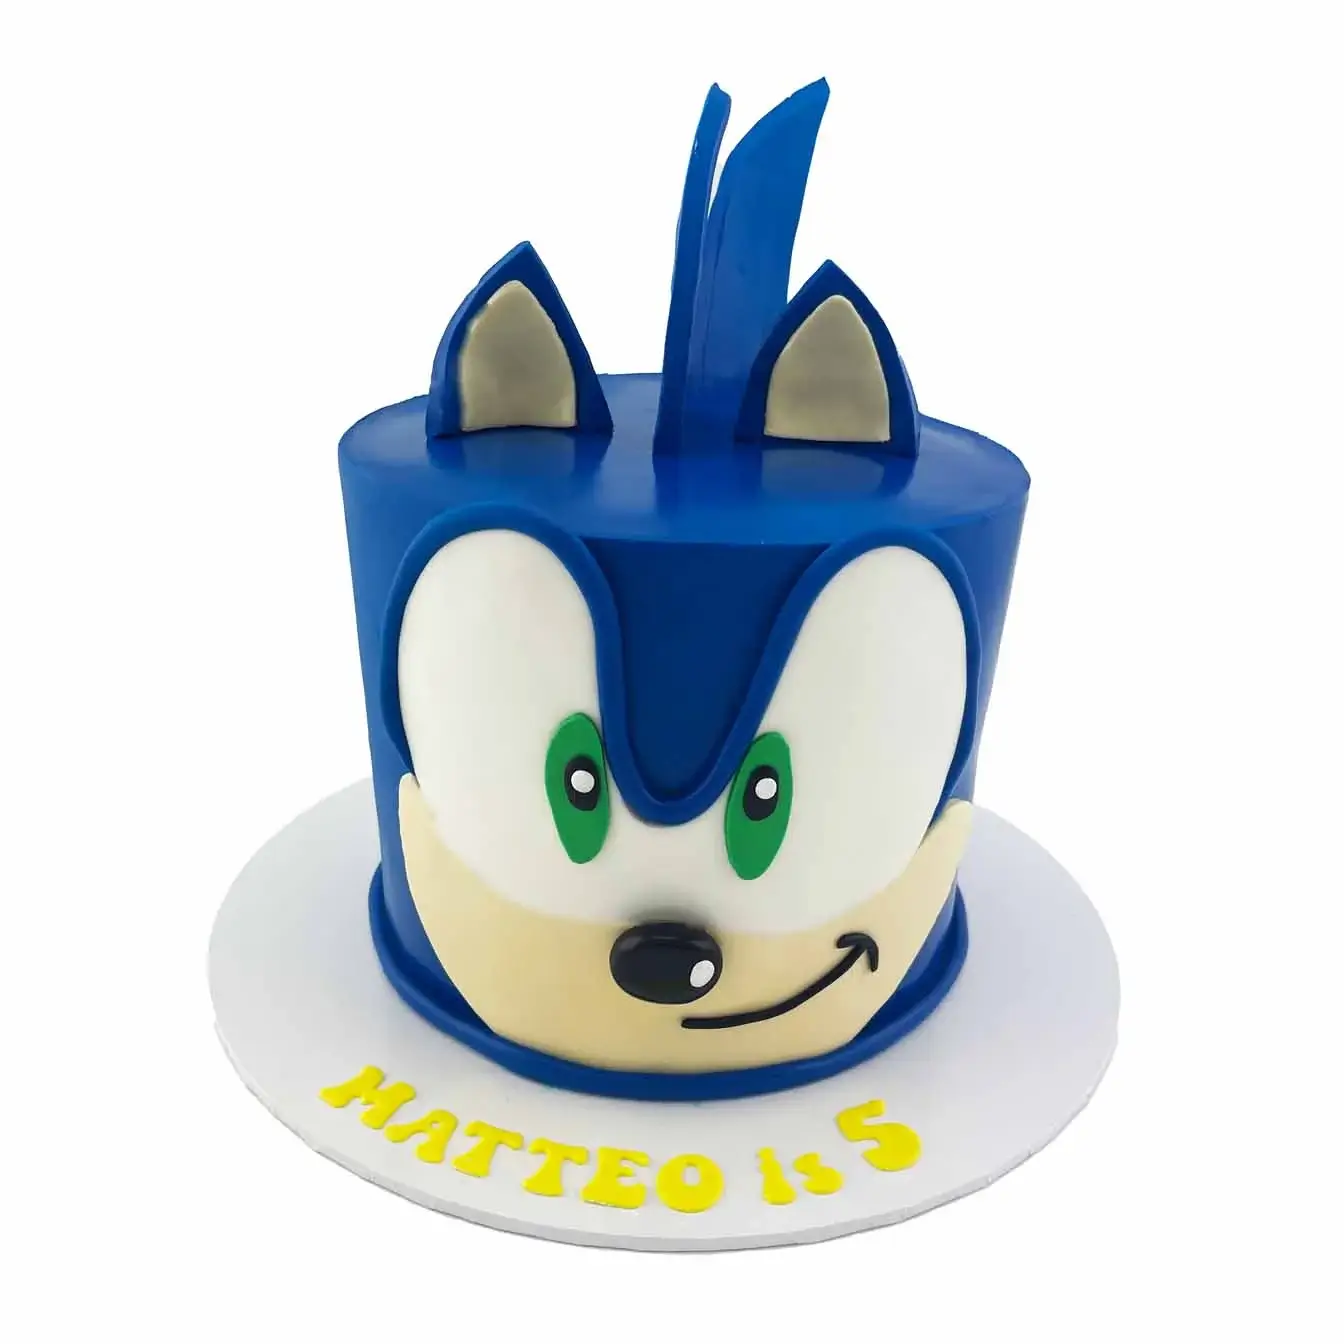 Sonic the Hedgehog cake designed to look like the iconic blue video game character, with red sneakers and a friendly smile, ideal for a Sonic-themed party or celebration.Sonic the Hedgehog cake designed to look like the iconic blue video game character, with red sneakers and a friendly smile, ideal for a Sonic-themed party or celebration.